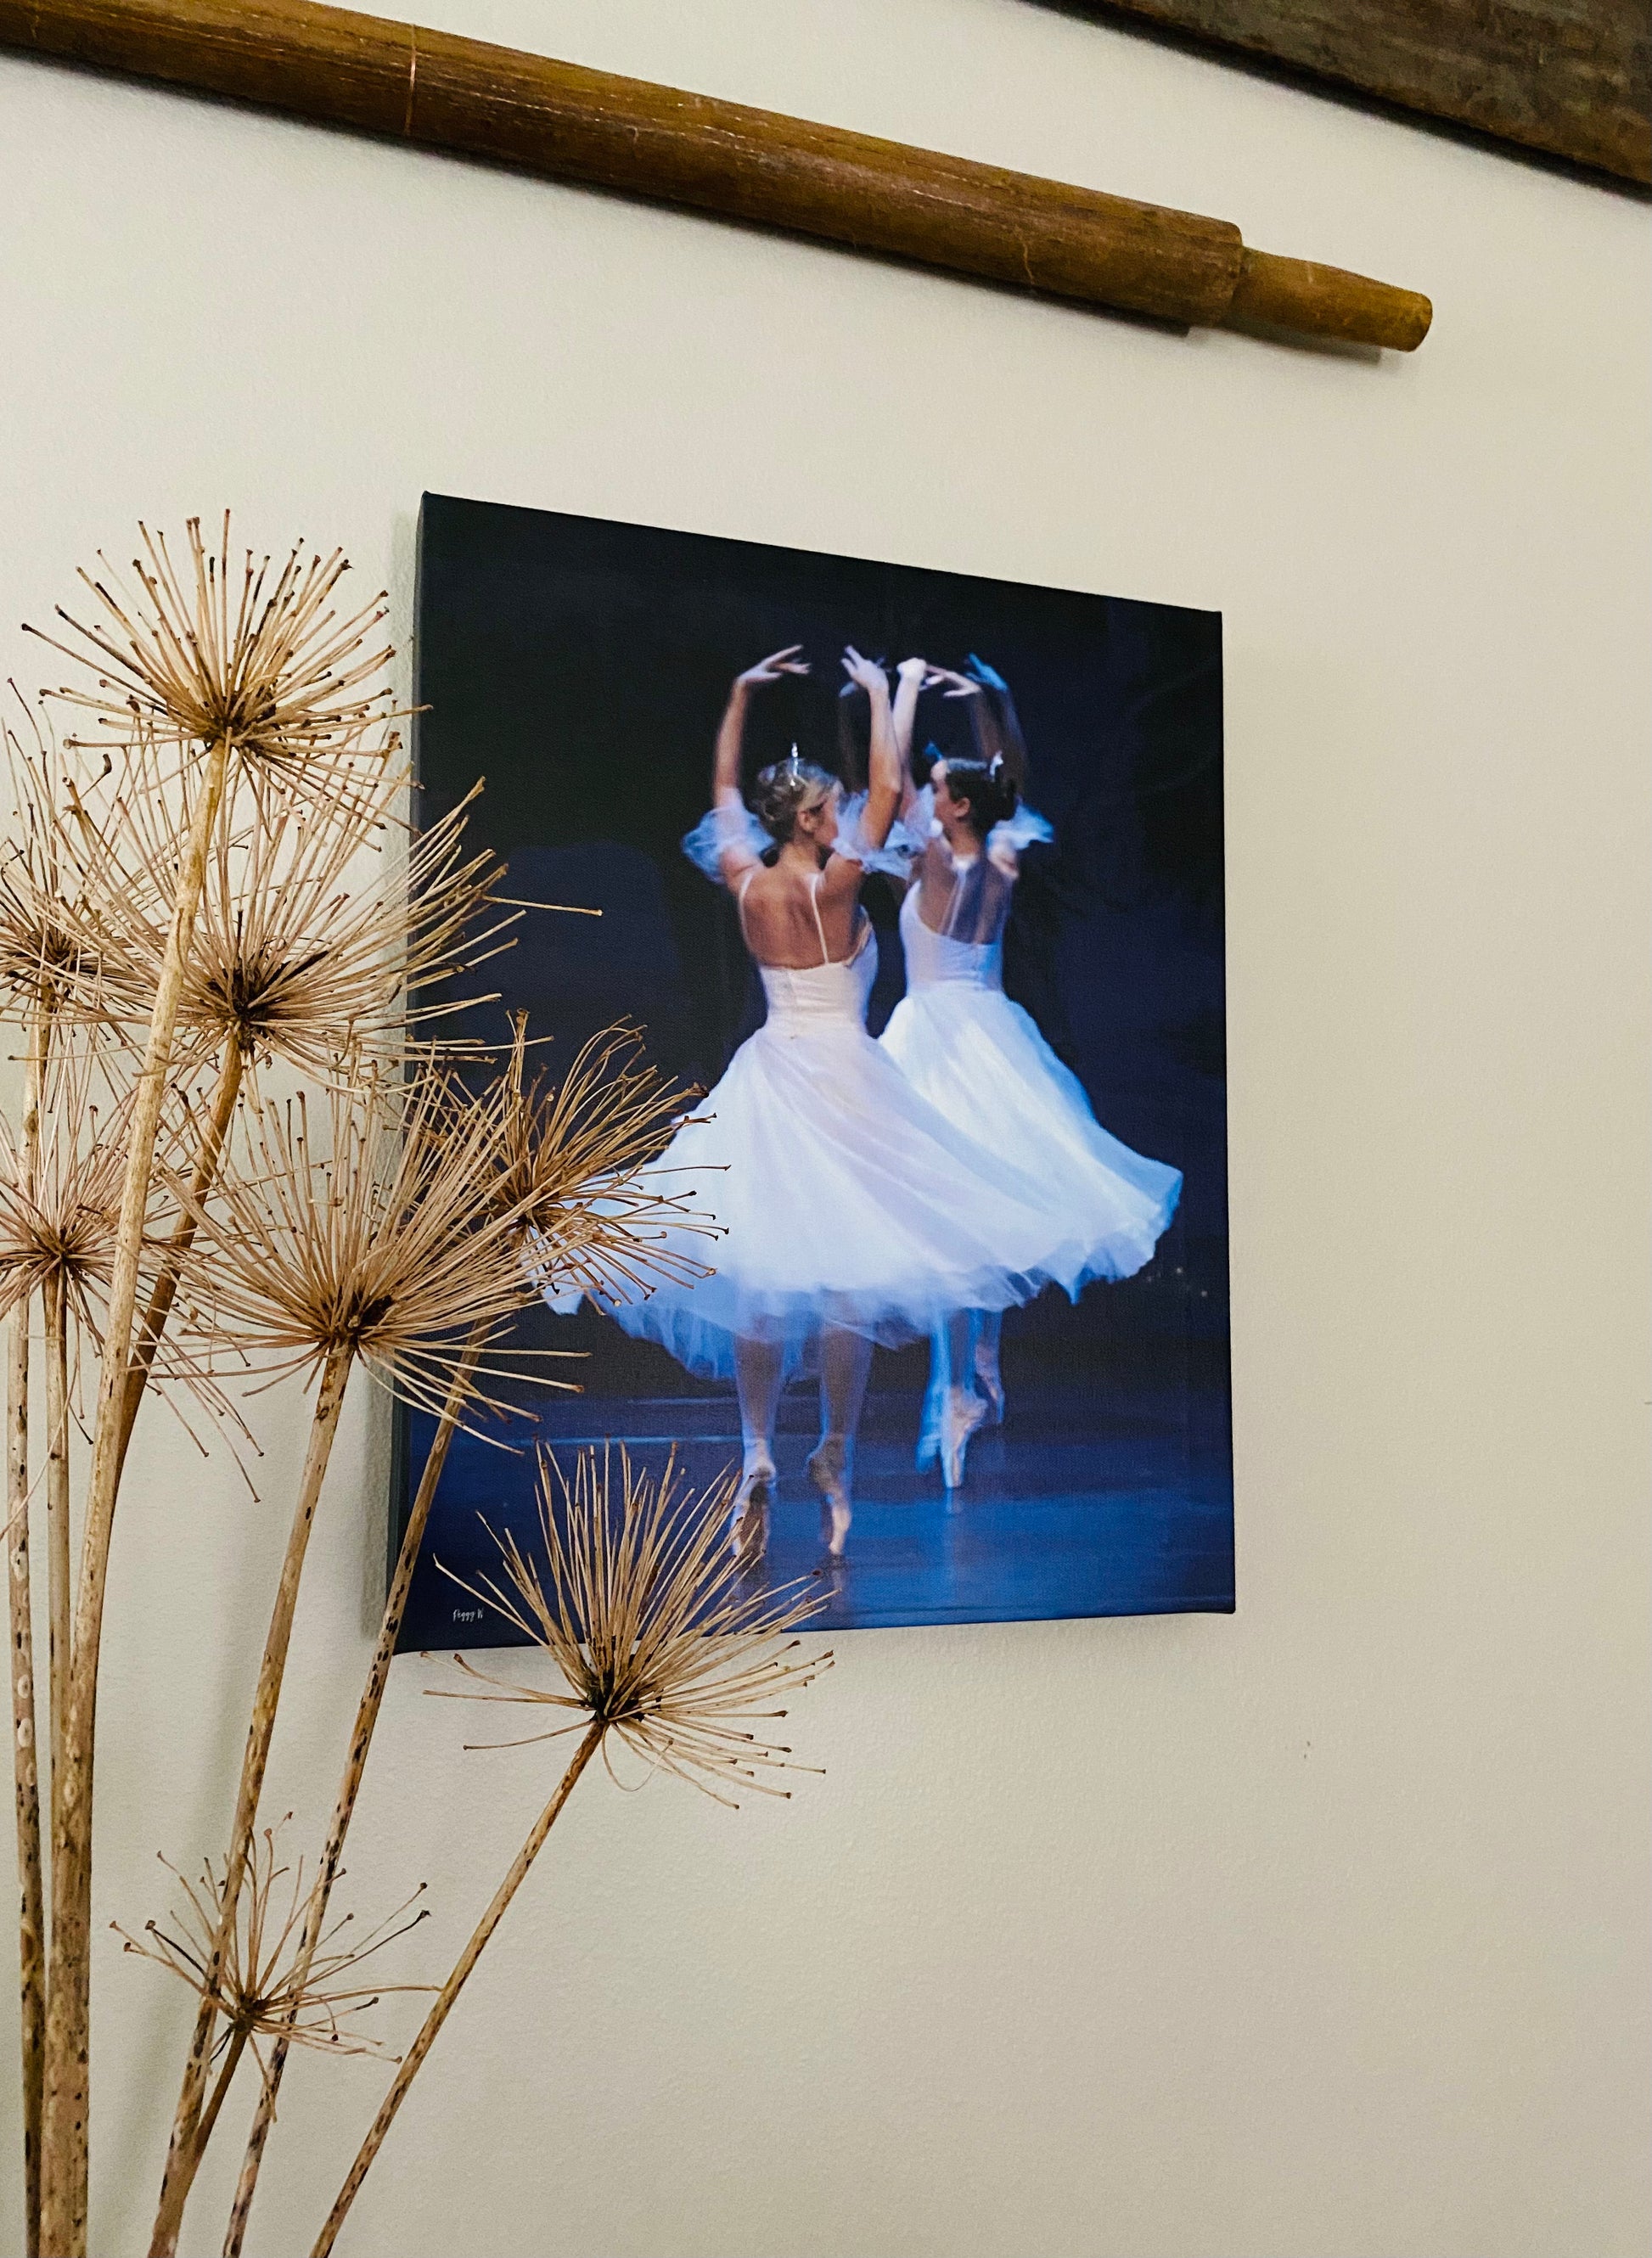 a photo of a painting of graceful ballerinas in white wearing tiaras dancing on point on stage with a dark backdrop